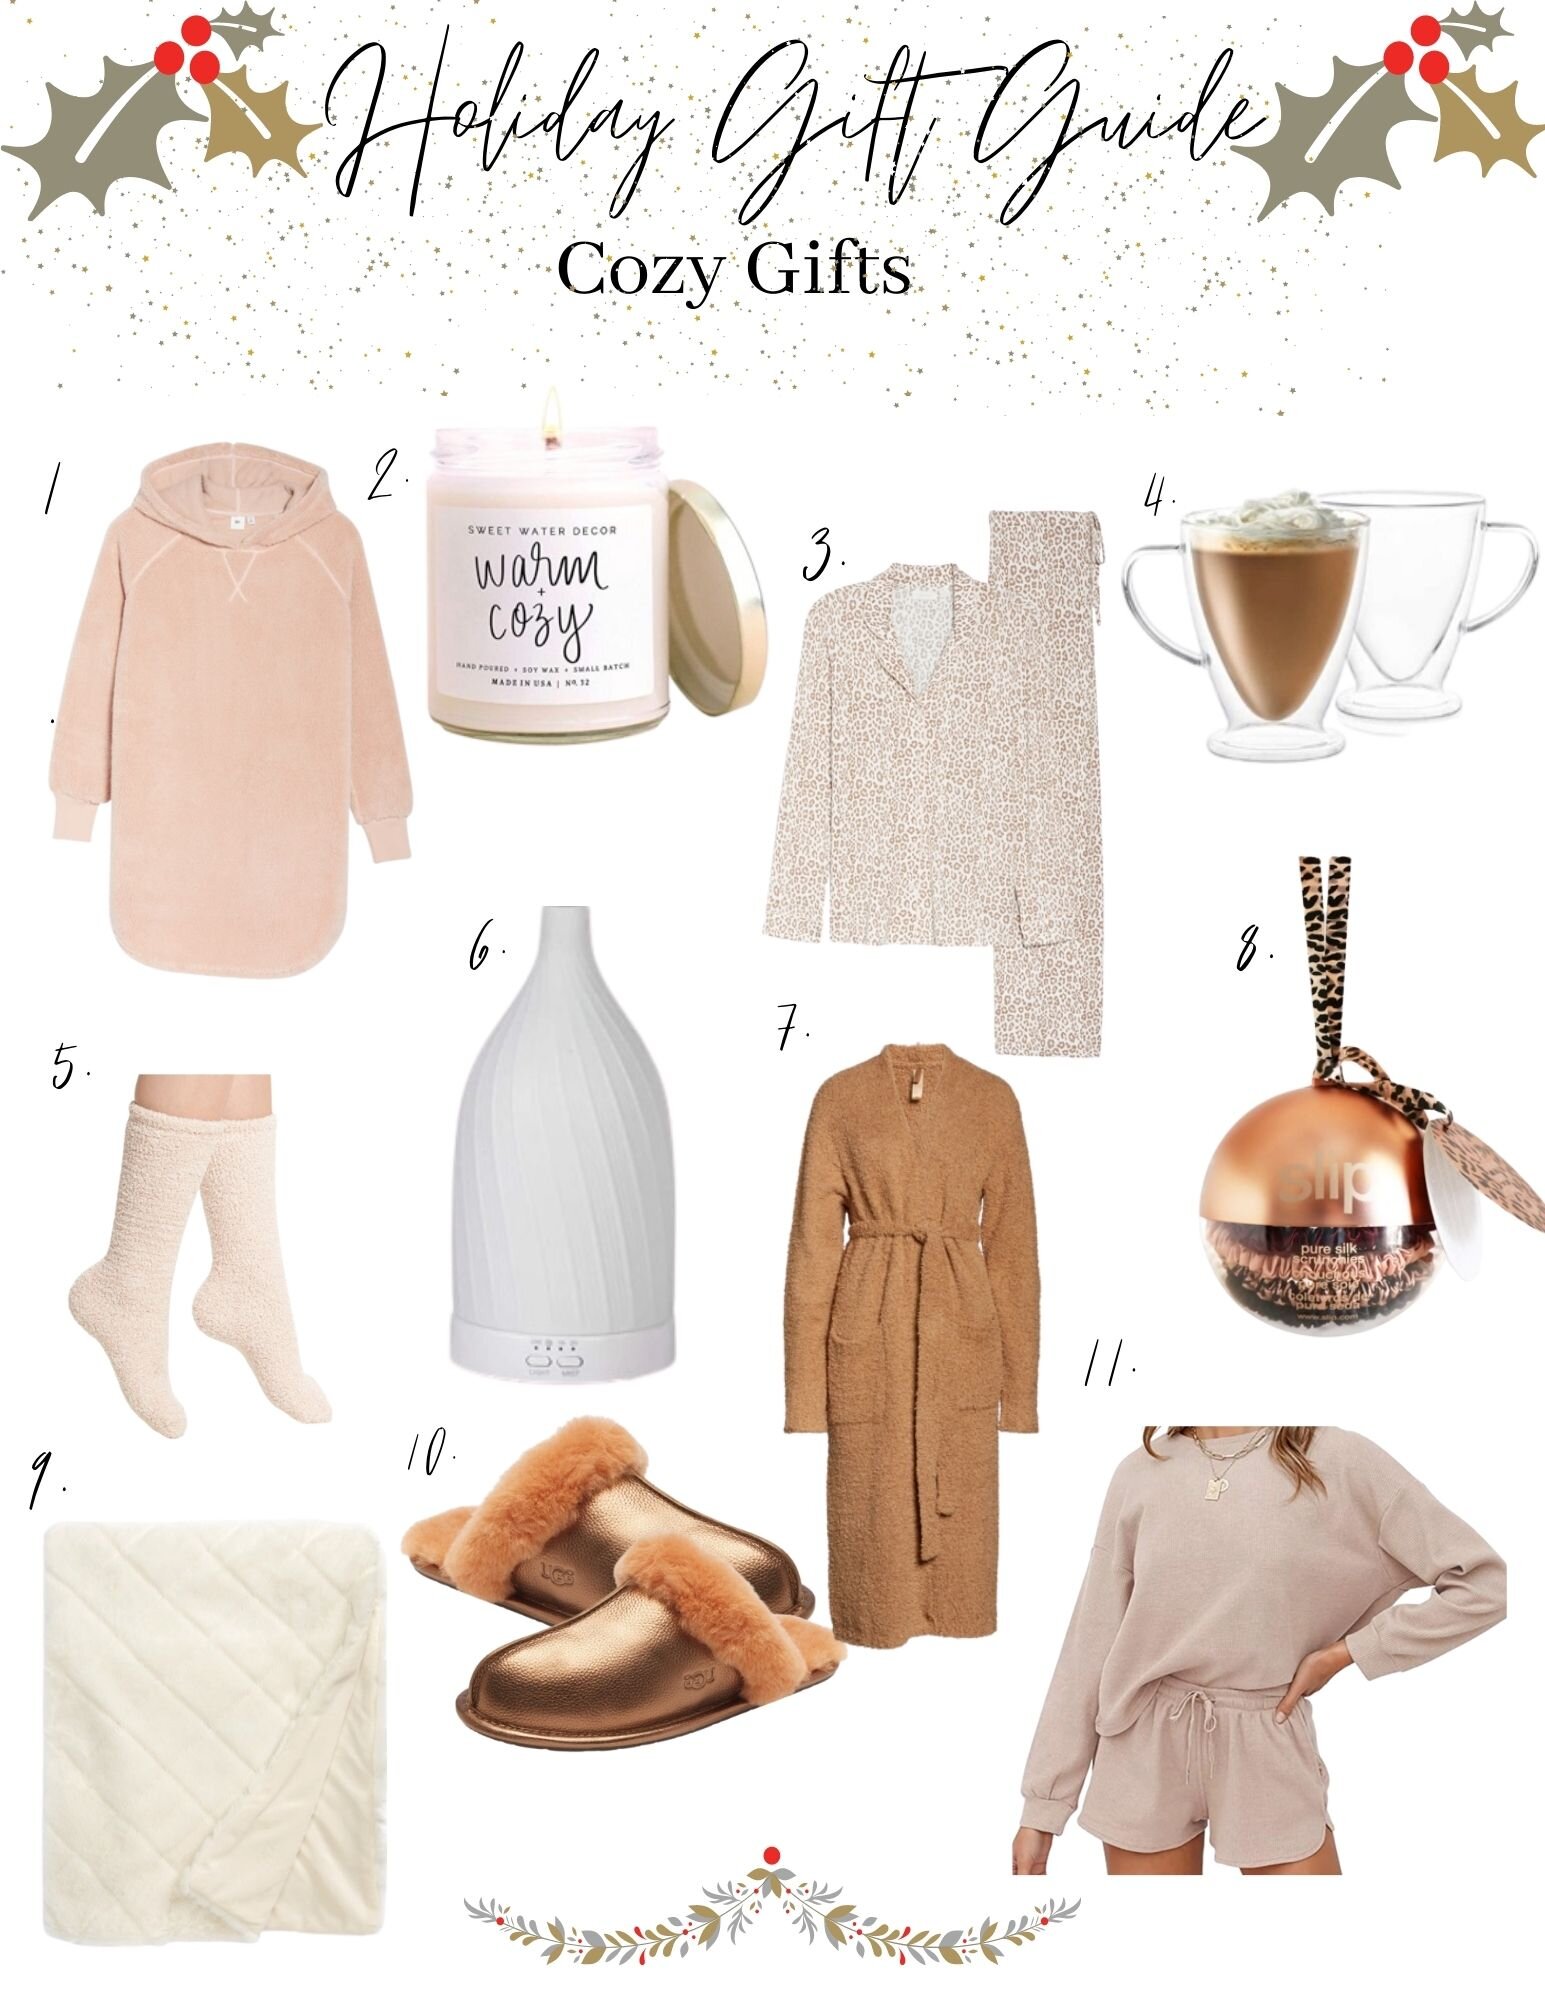 Cozy Holiday Gift Guide